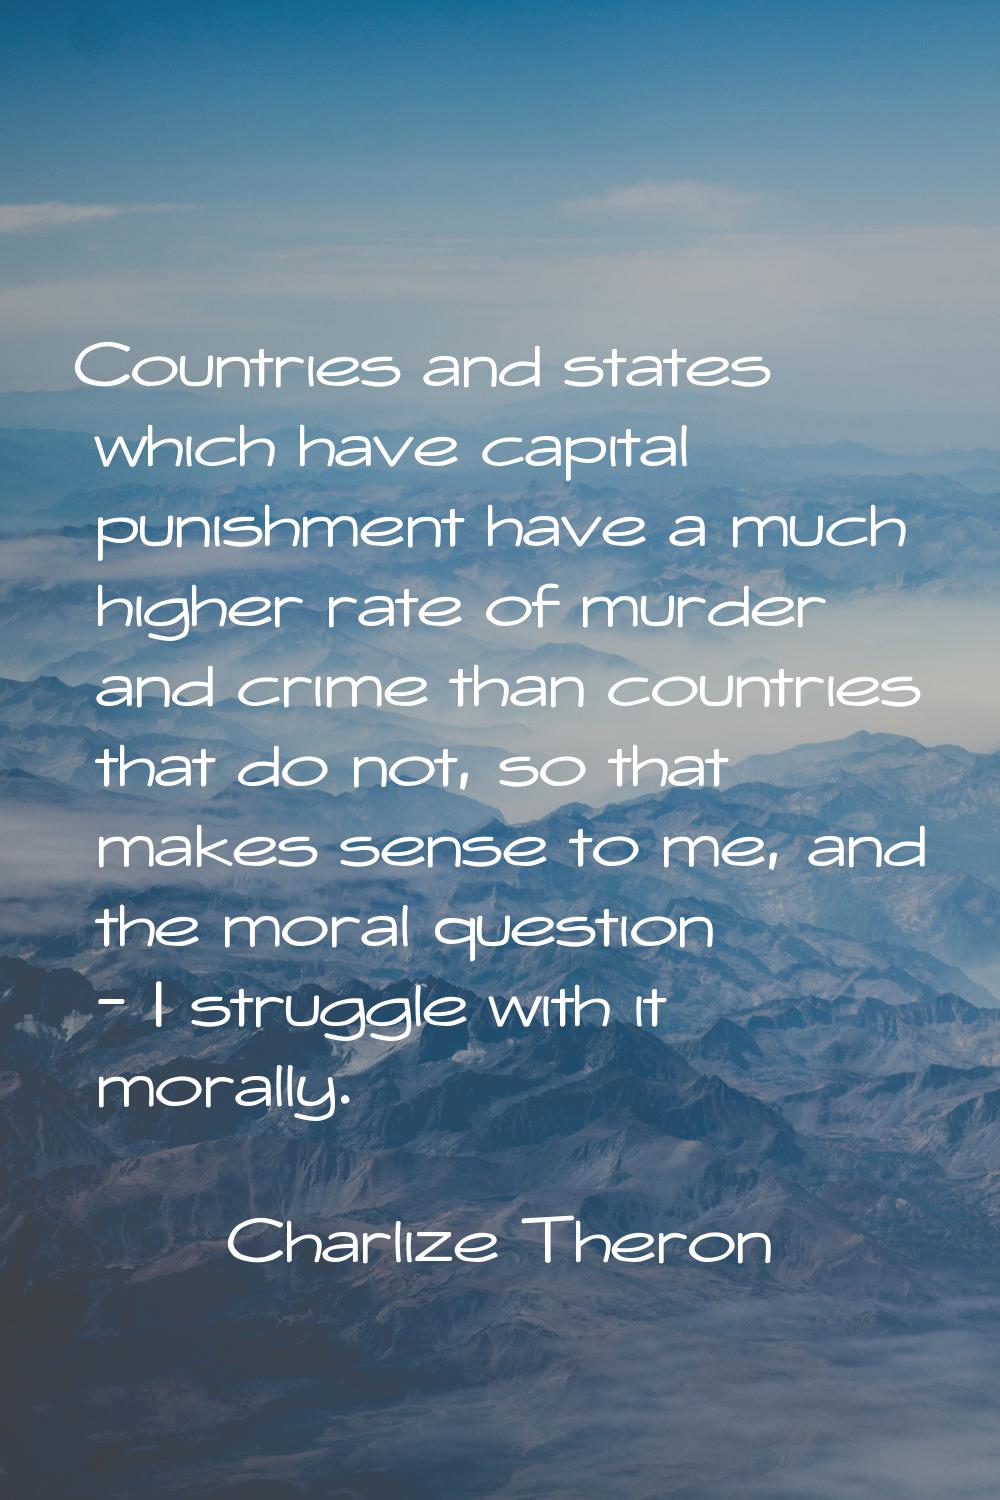 Countries and states which have capital punishment have a much higher rate of murder and crime than